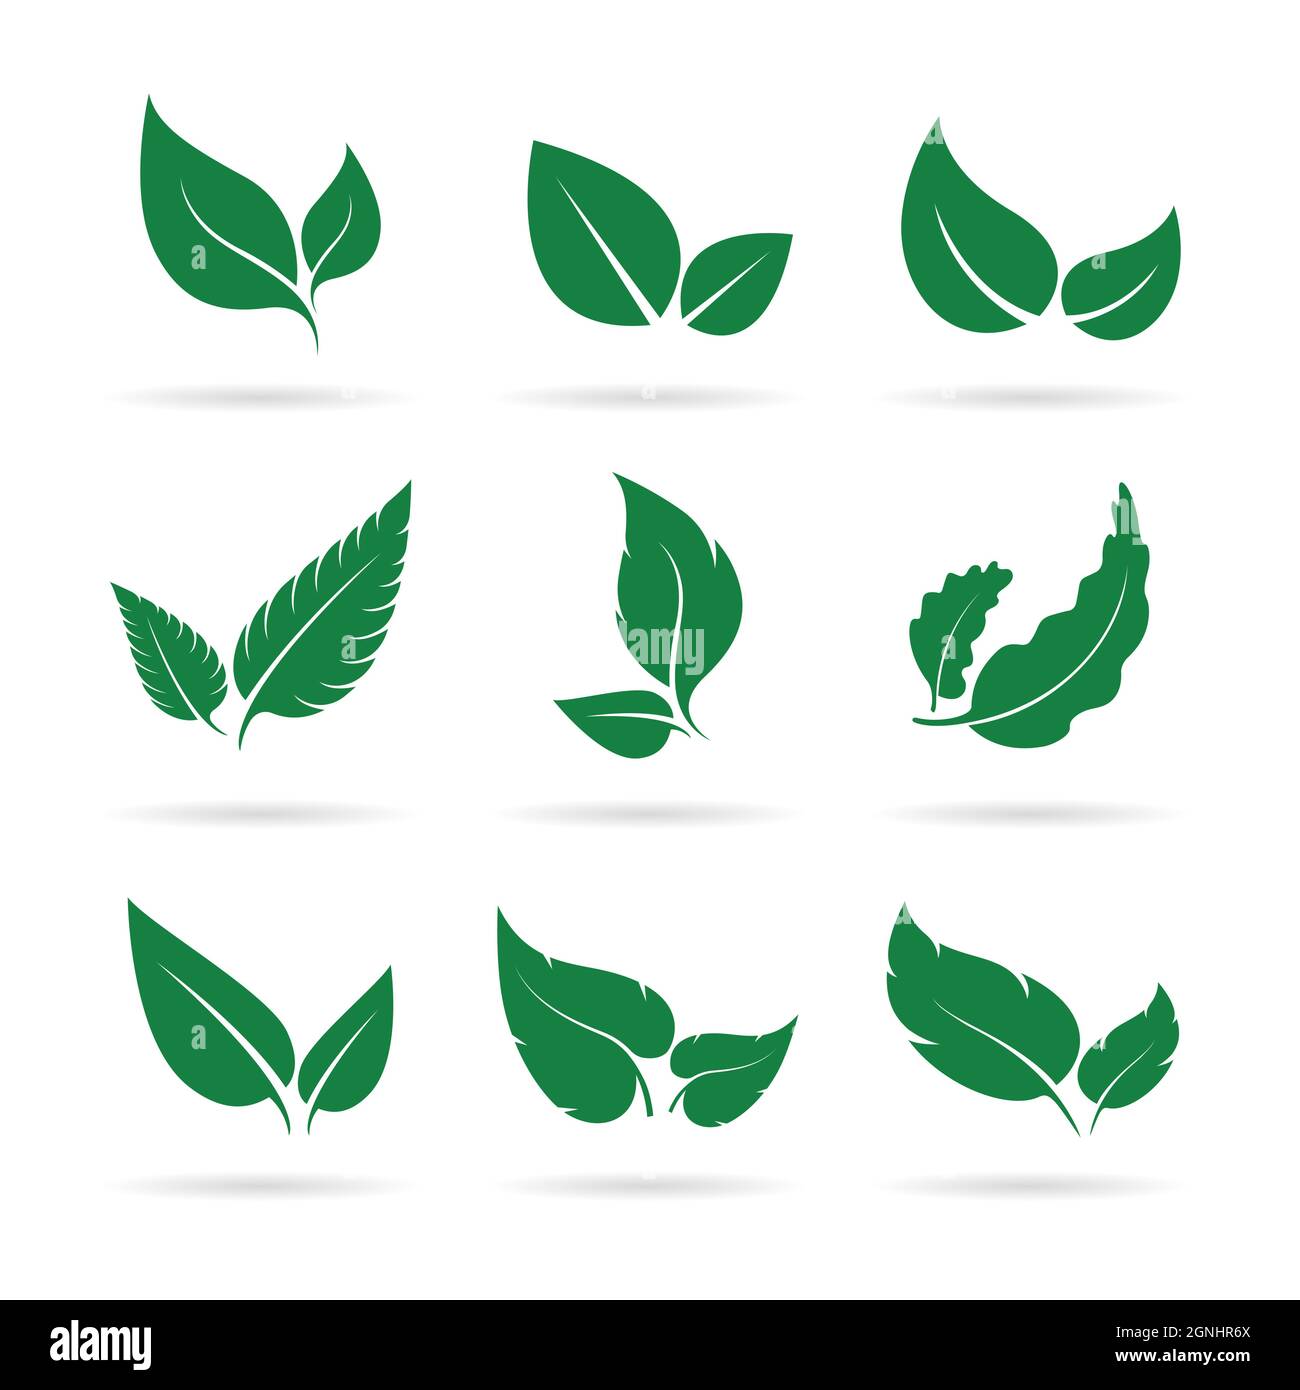 Vector of green leaves icon set design on white background. Easy editable layered vector illustration. Nature. Stock Vector